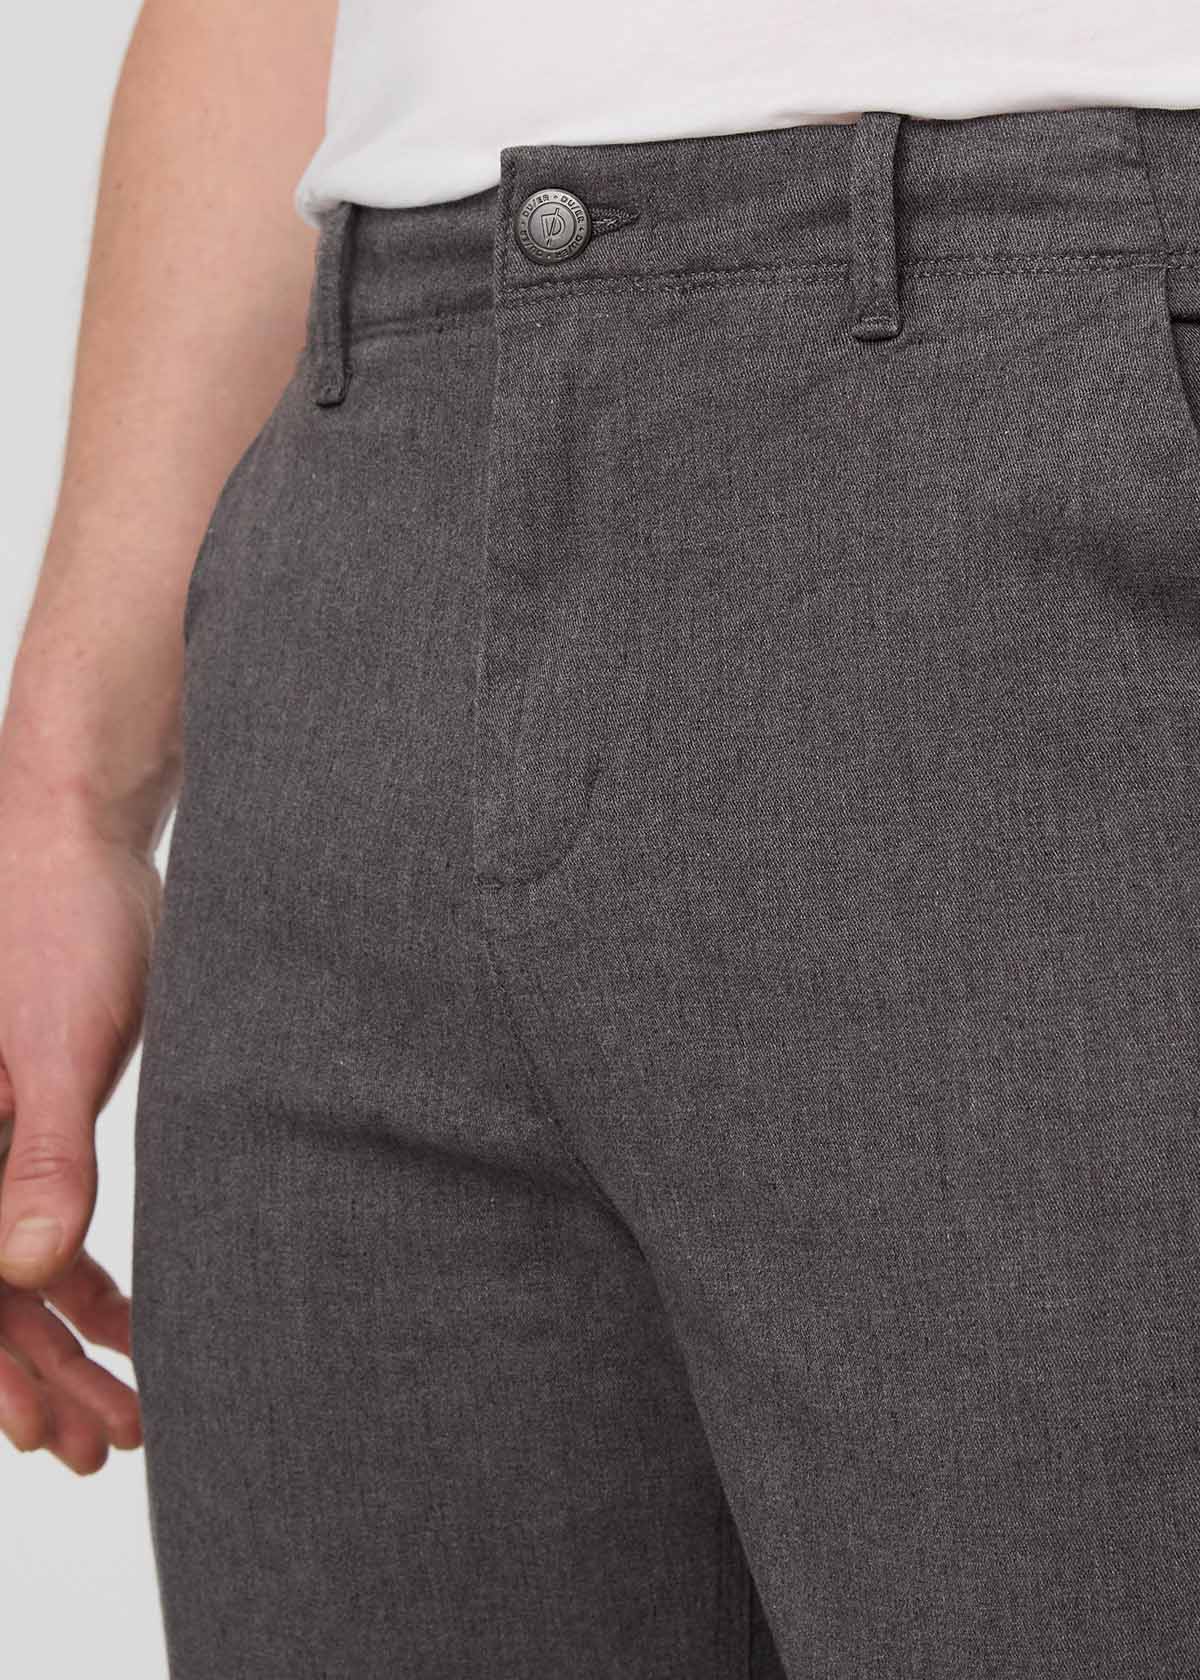 mens stretch heather grey chino pants front waistband detail